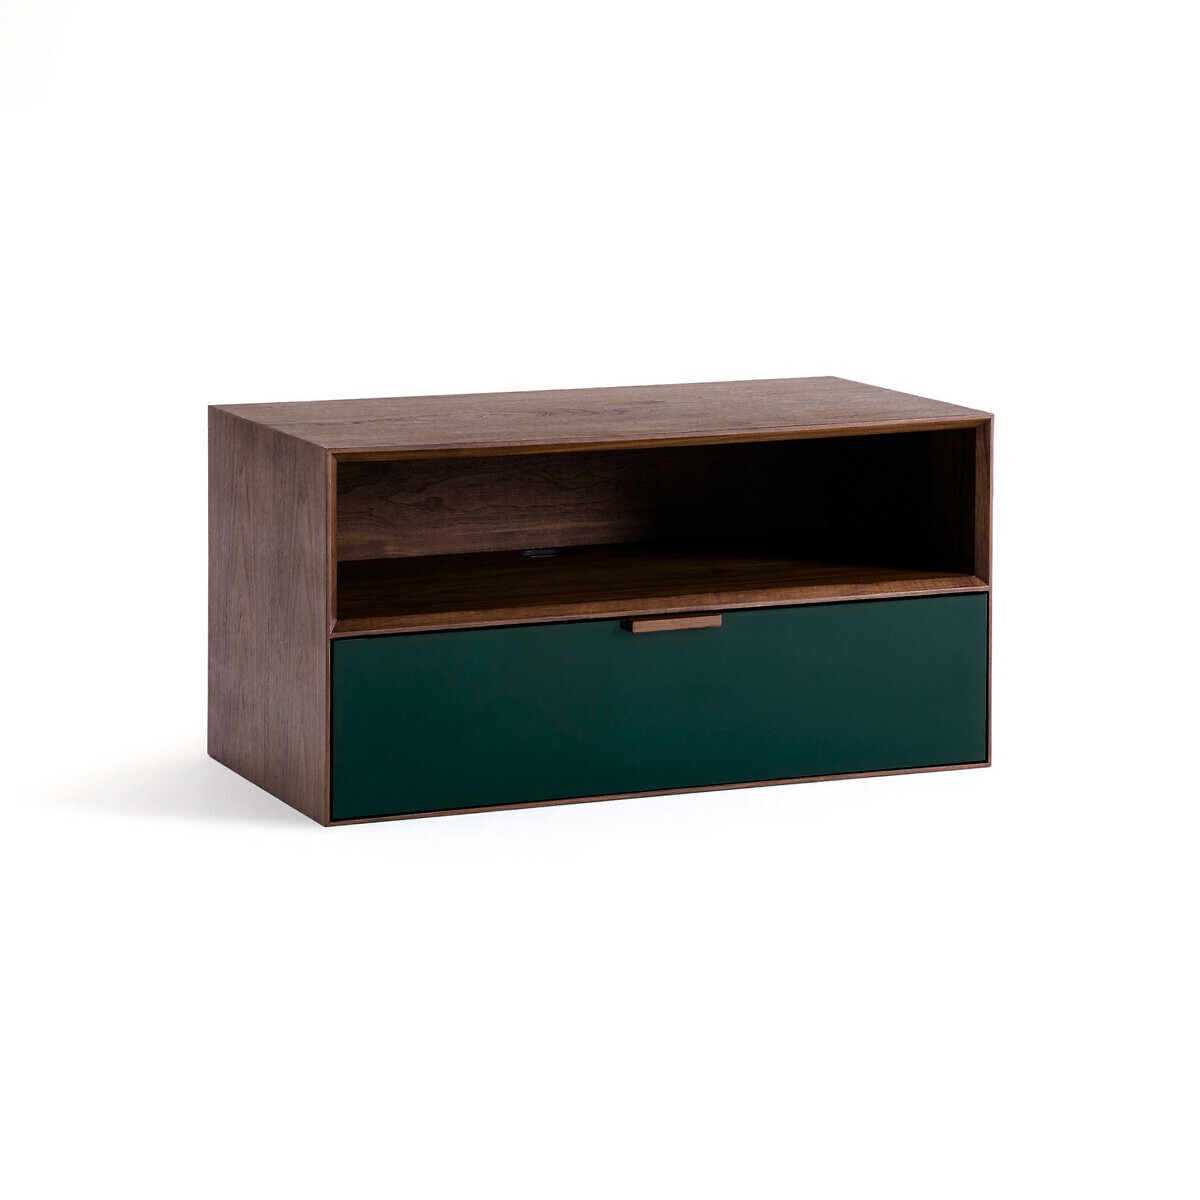 Aldon Walnut Veneer TV Cabinet with Compartment & Lacquered Drawer - image 1